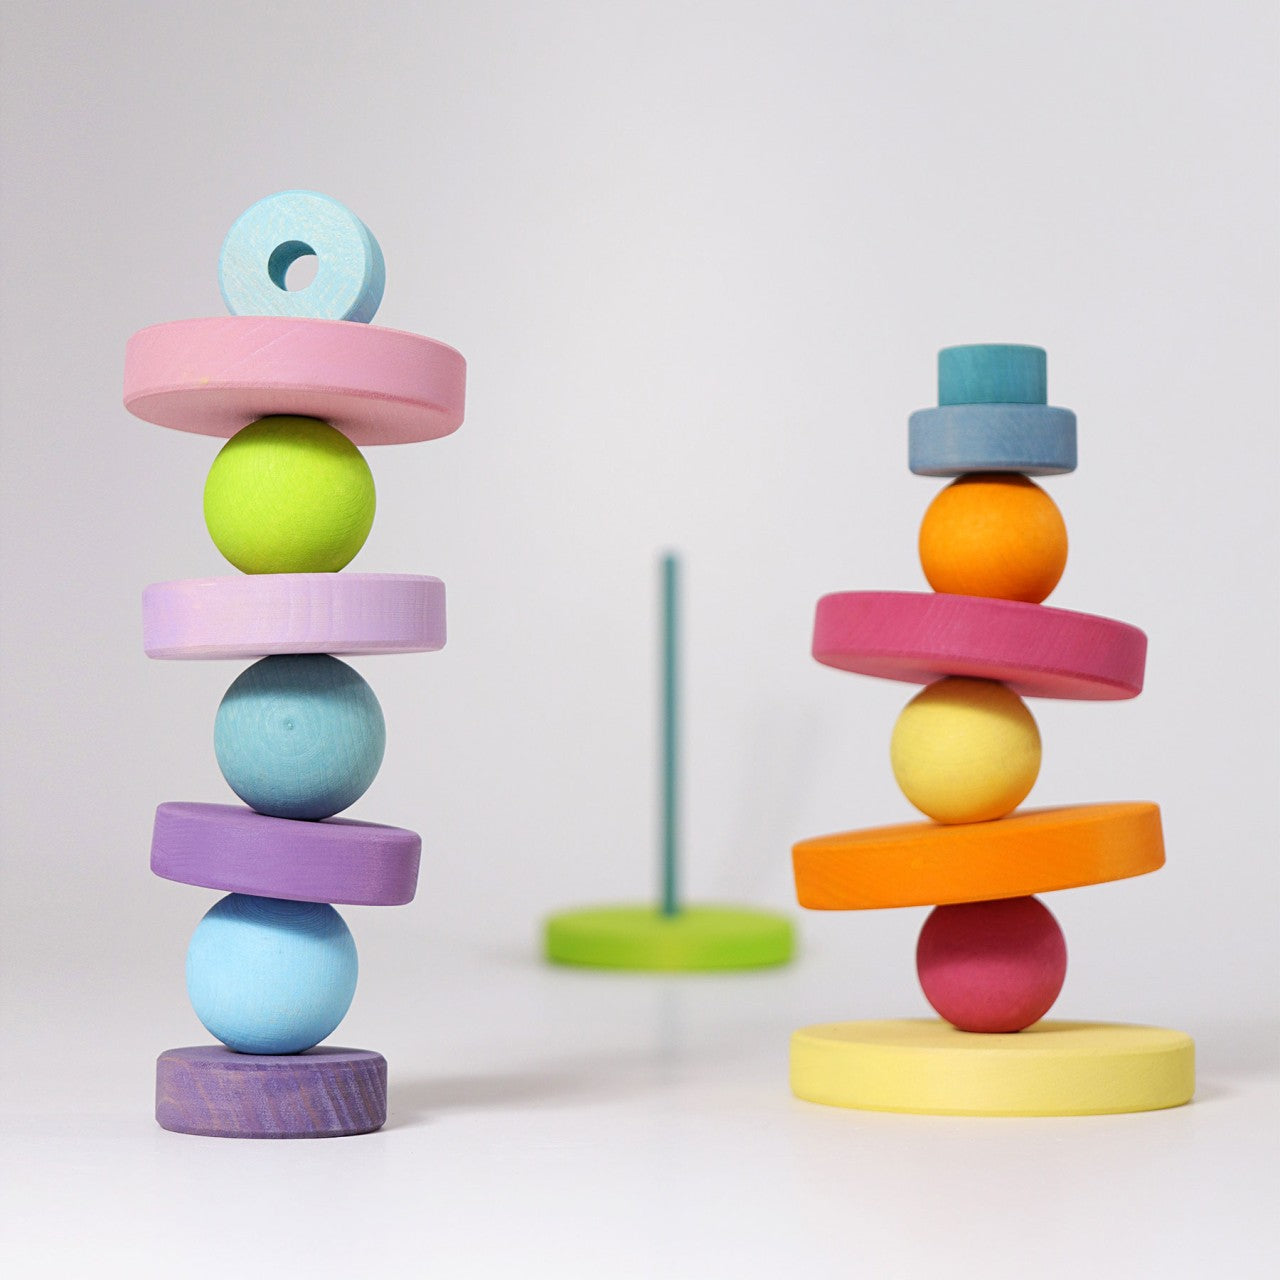 Pastel Conical Tower Stacker | Wooden Toys for Kids | Toddler Activity Toy